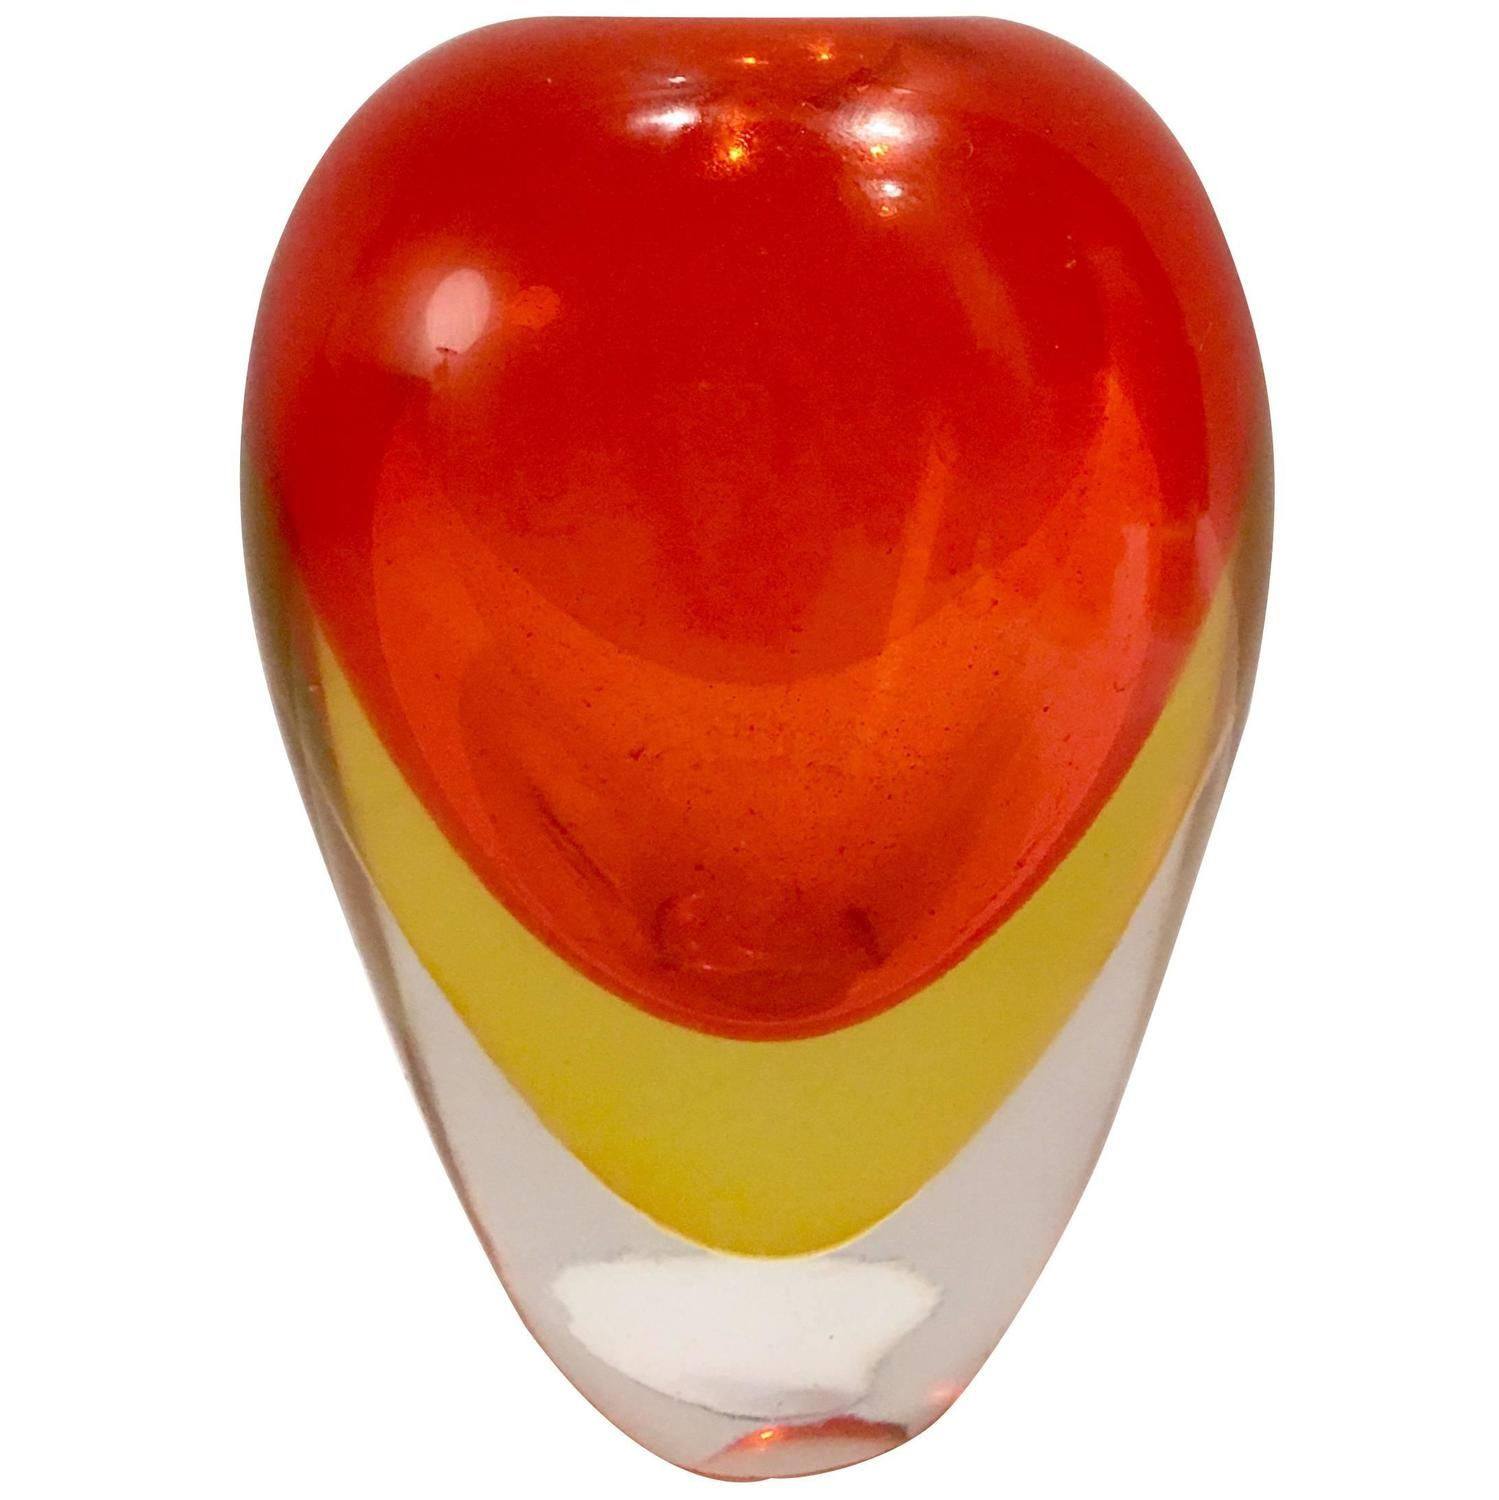 murano glass bud vase of italian murano glass sommerso bud vase murano glass and beads regarding italian murano glass sommerso bud vase see more antique and modern vases and vessels at https www 1stdibs com furniture decorative objects vases vessels